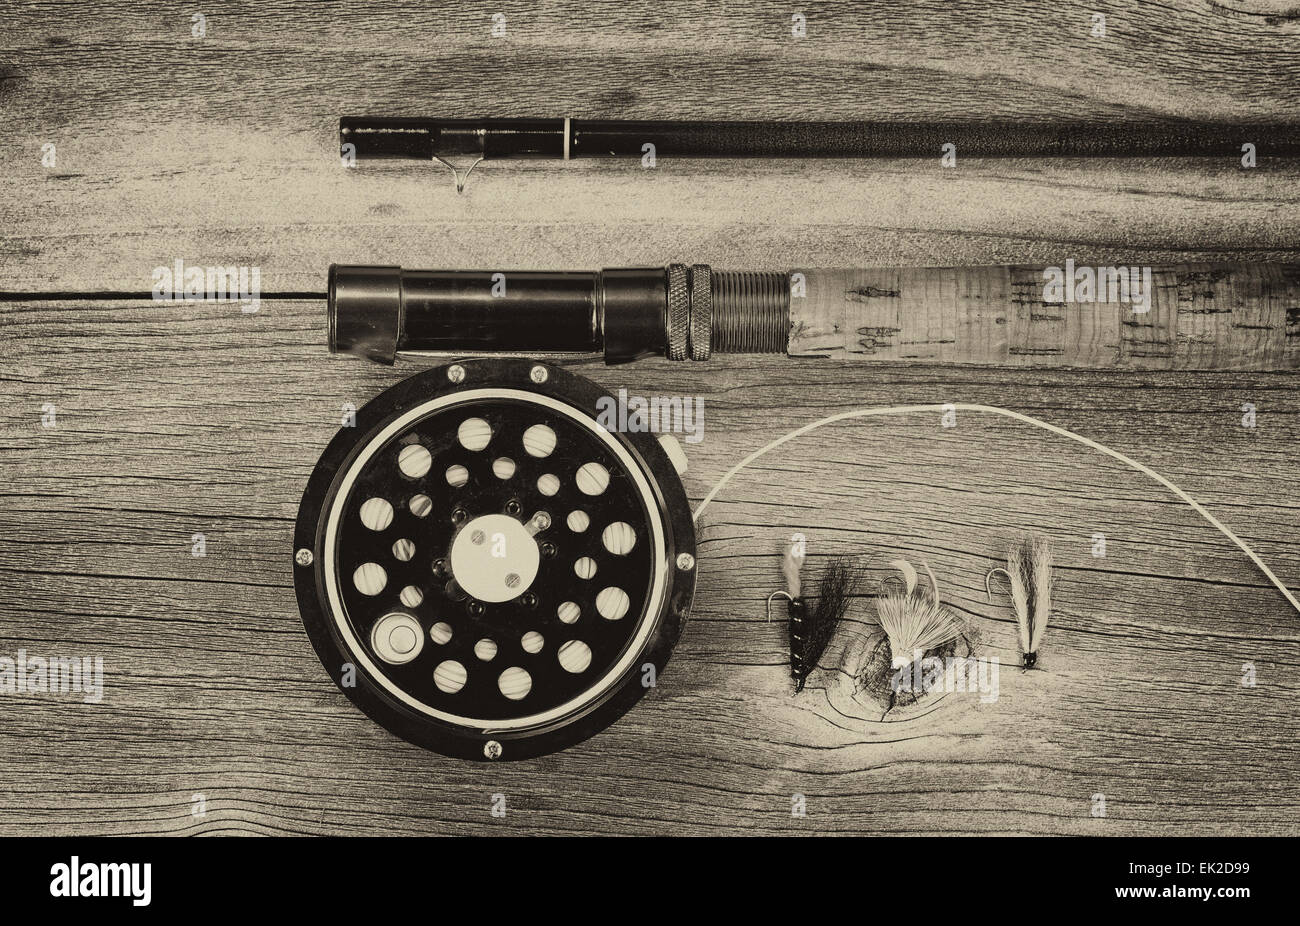 Vintage concept of an antique fly fishing reel and rod on rustic wood. Layout in horizontal format. Stock Photo